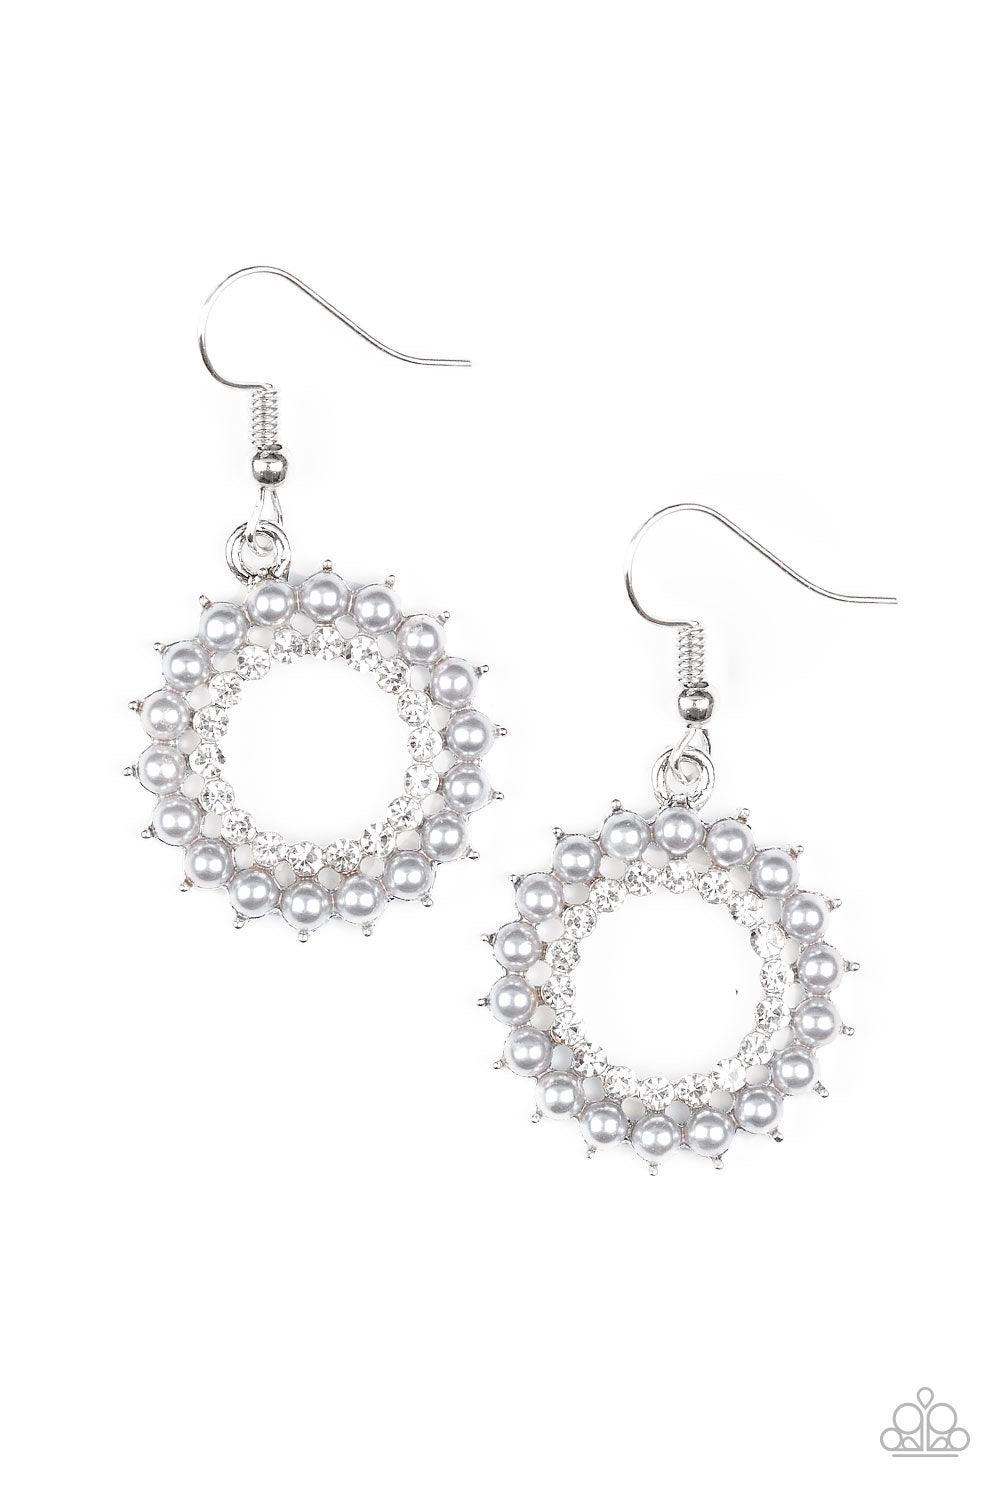 Paparazzi Accessories Wreathed in Radiance - Silver Dainty silver pearls spin around a radiant white rhinestone center, coalescing into a refined hoop. Earring attaches to a standard fishhook fitting. Earrings